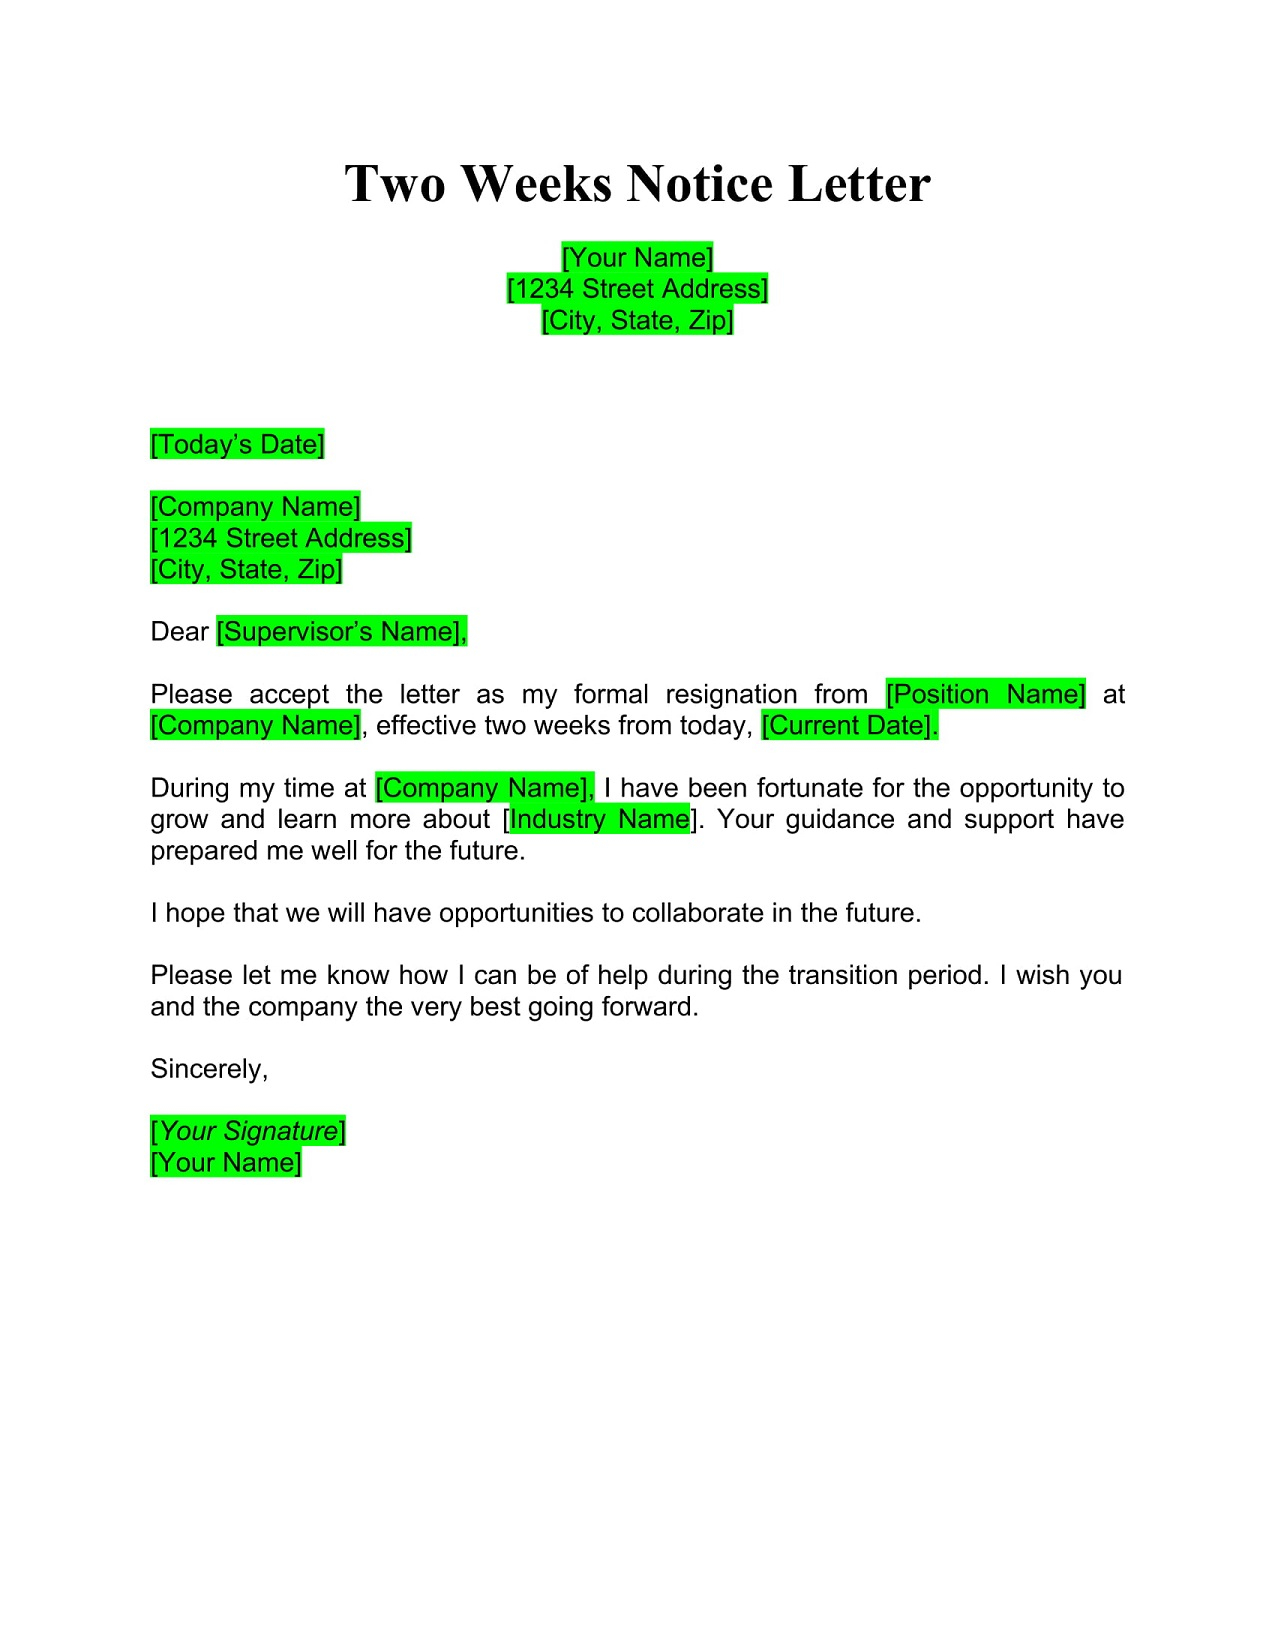 13 Sample Two Weeks Notice Letter Template SampleTemplatess 